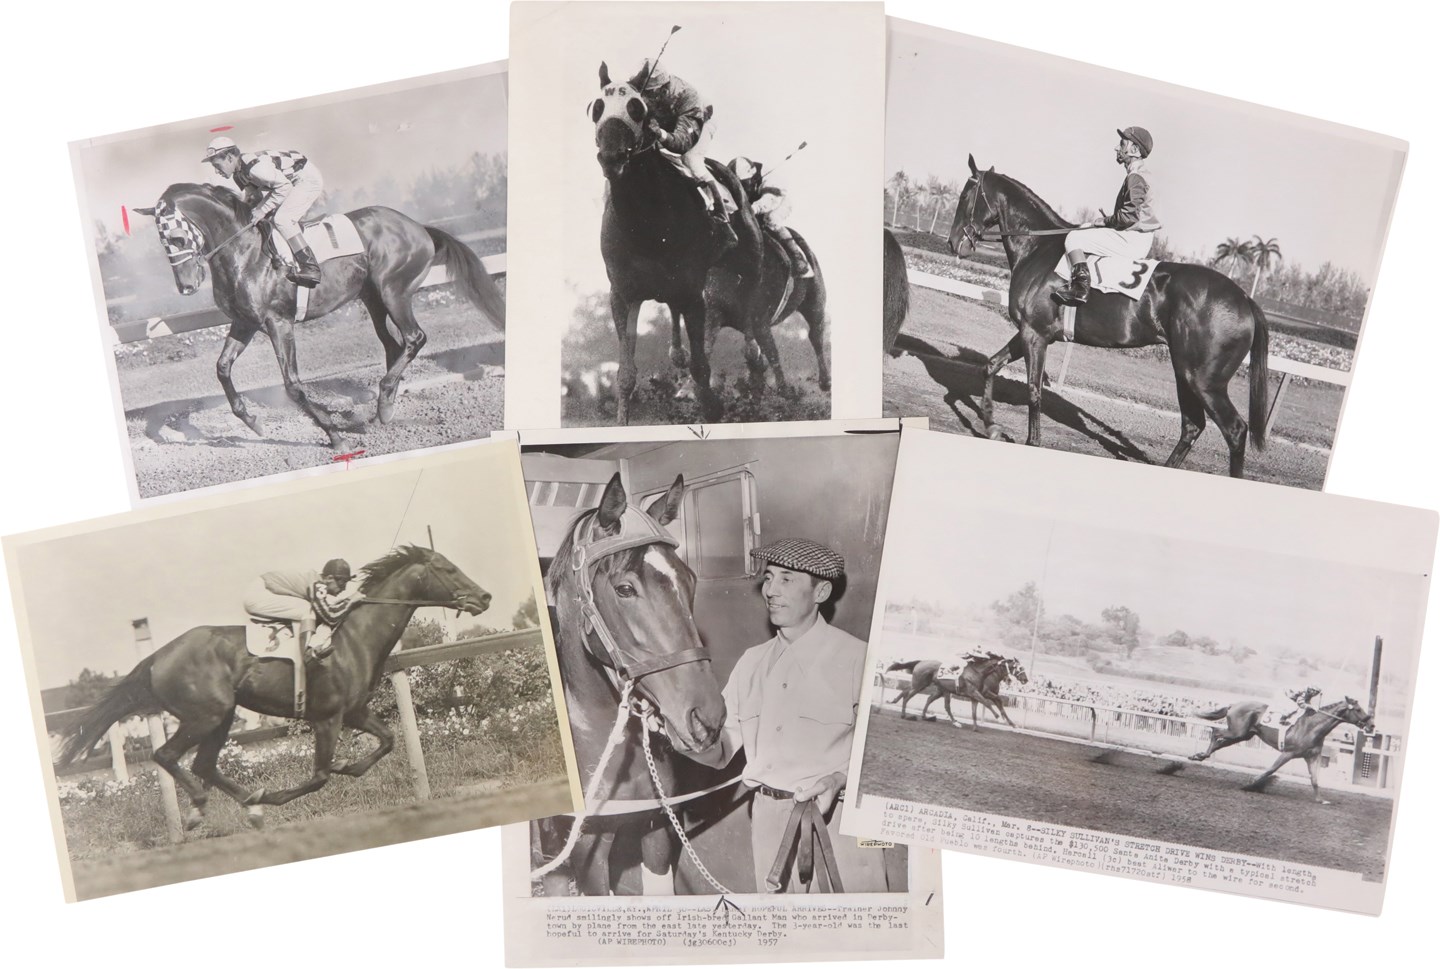 - Beautiful Photographs of Horse Racing's Star Thoroughbred Horses of the 1950s (56)